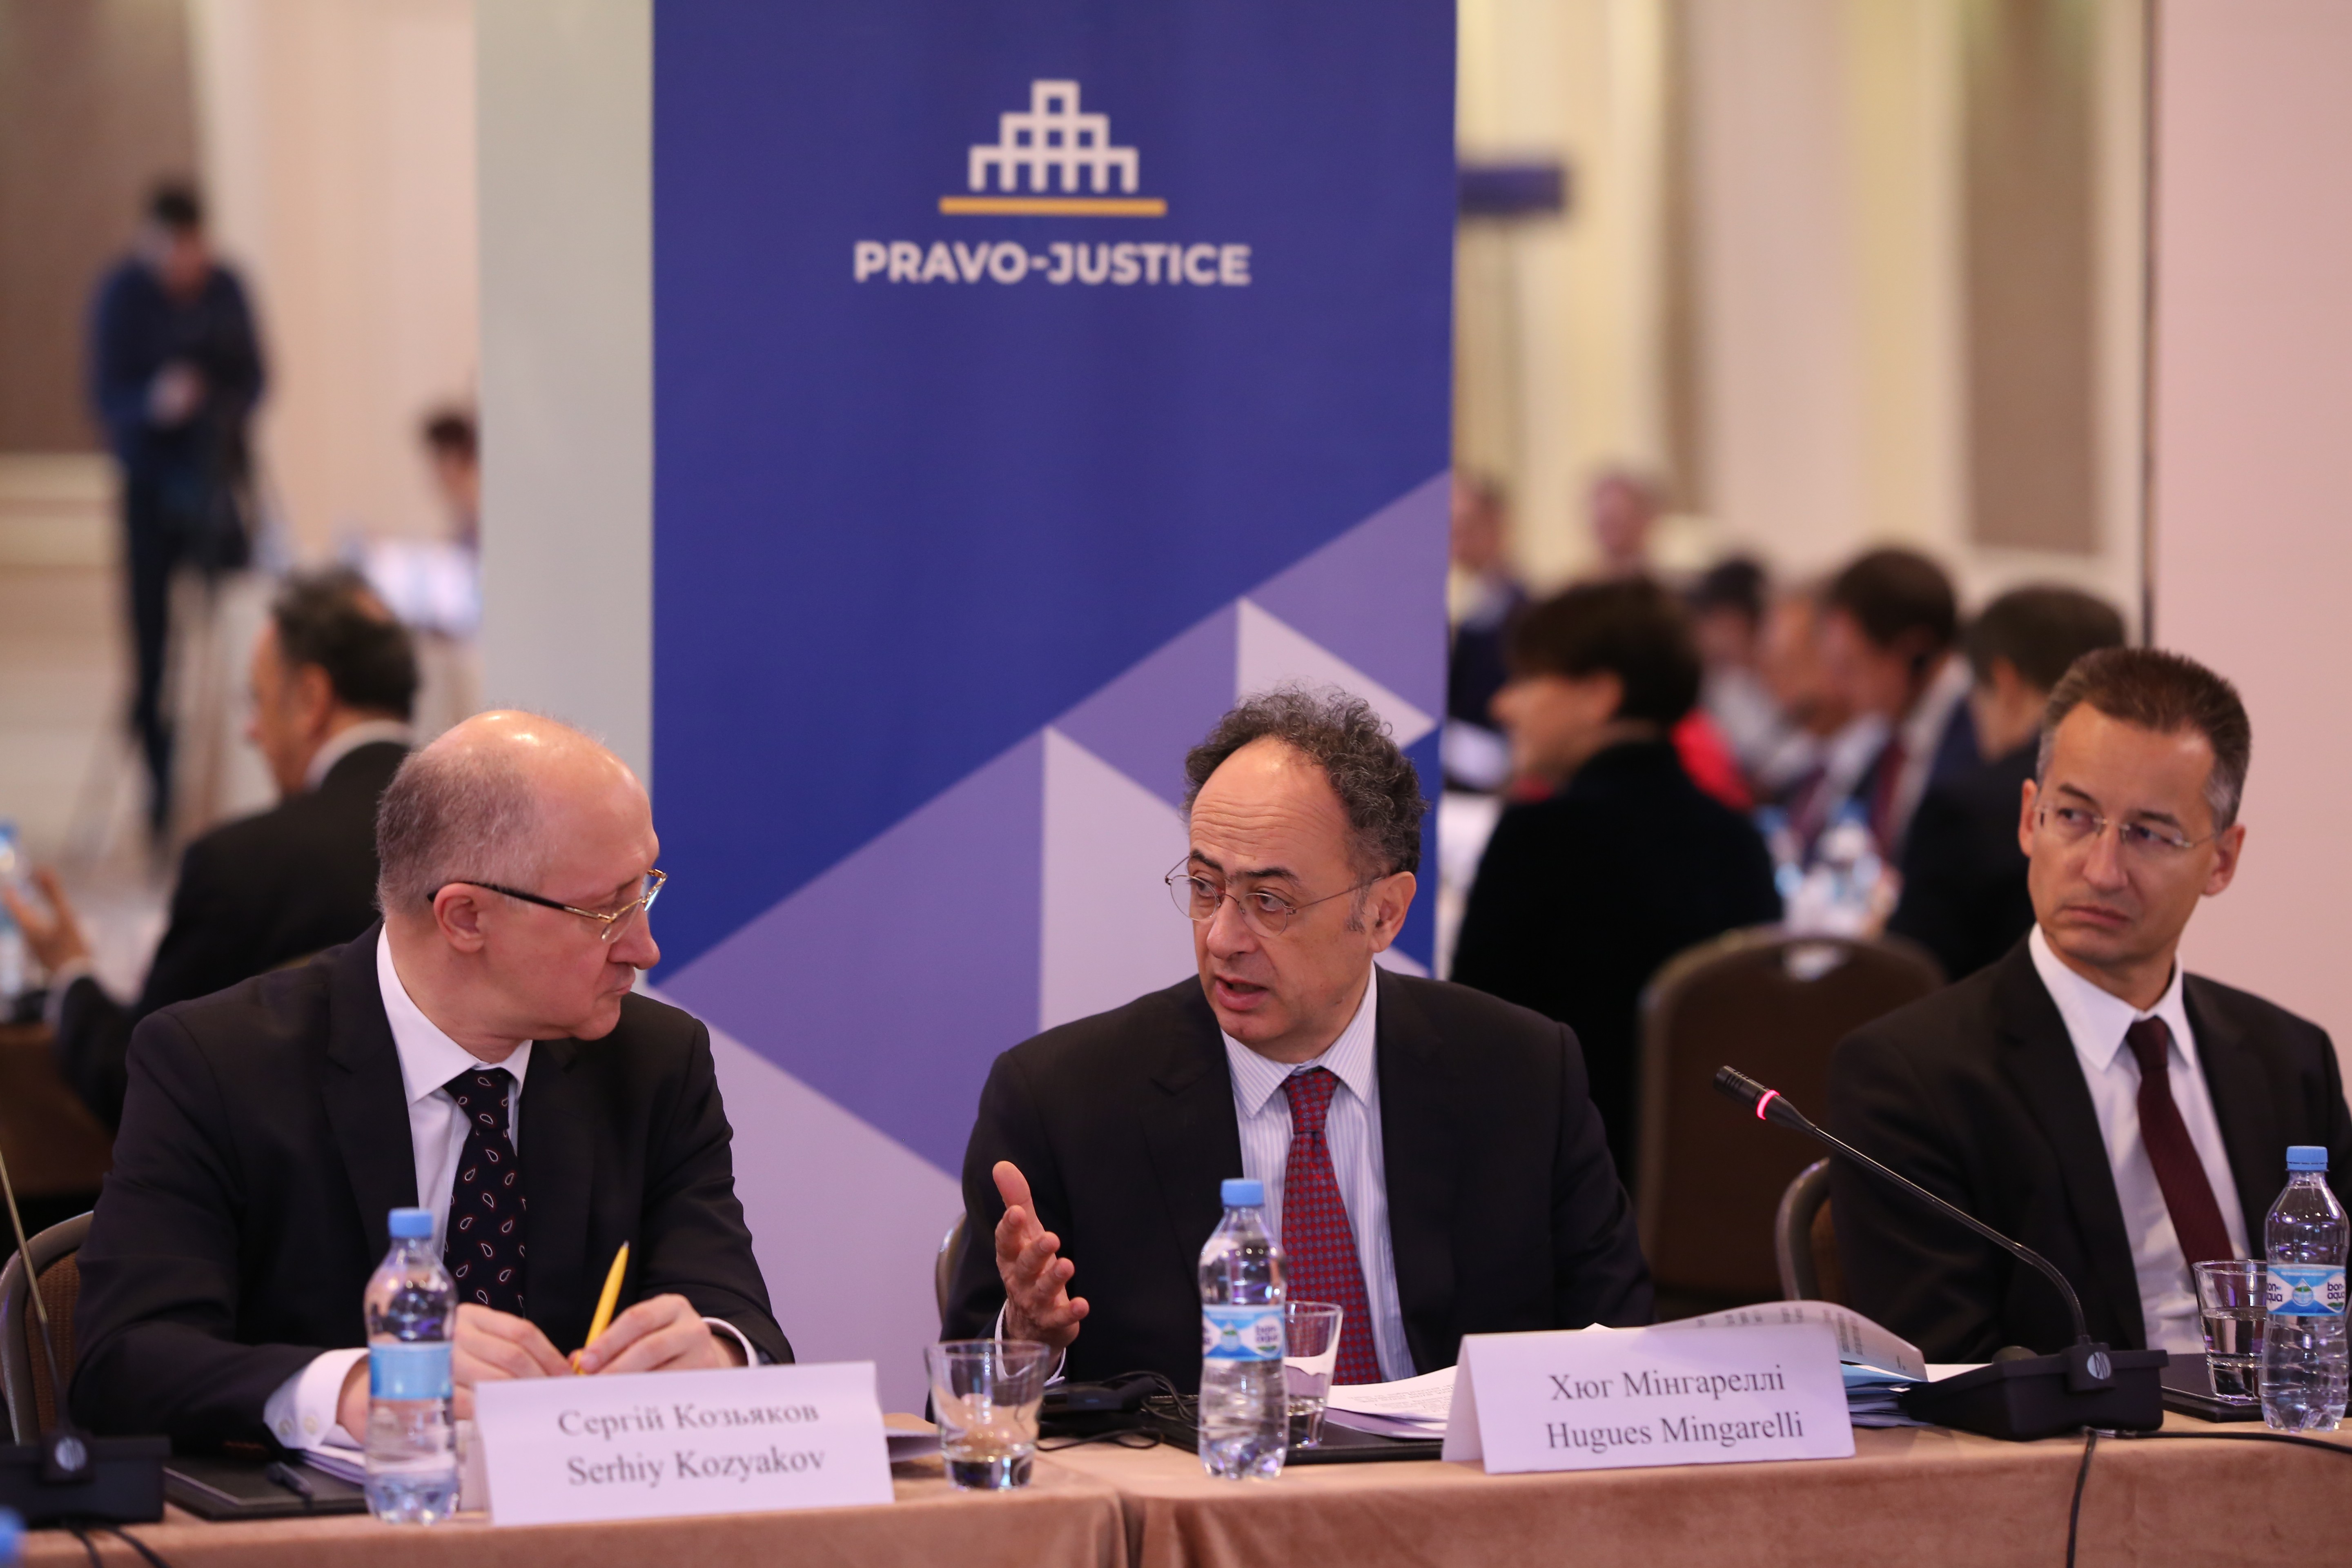 The EU Project "Pravo-Justice" Expert Team presented the Judiciary Selection and Evaluation Report